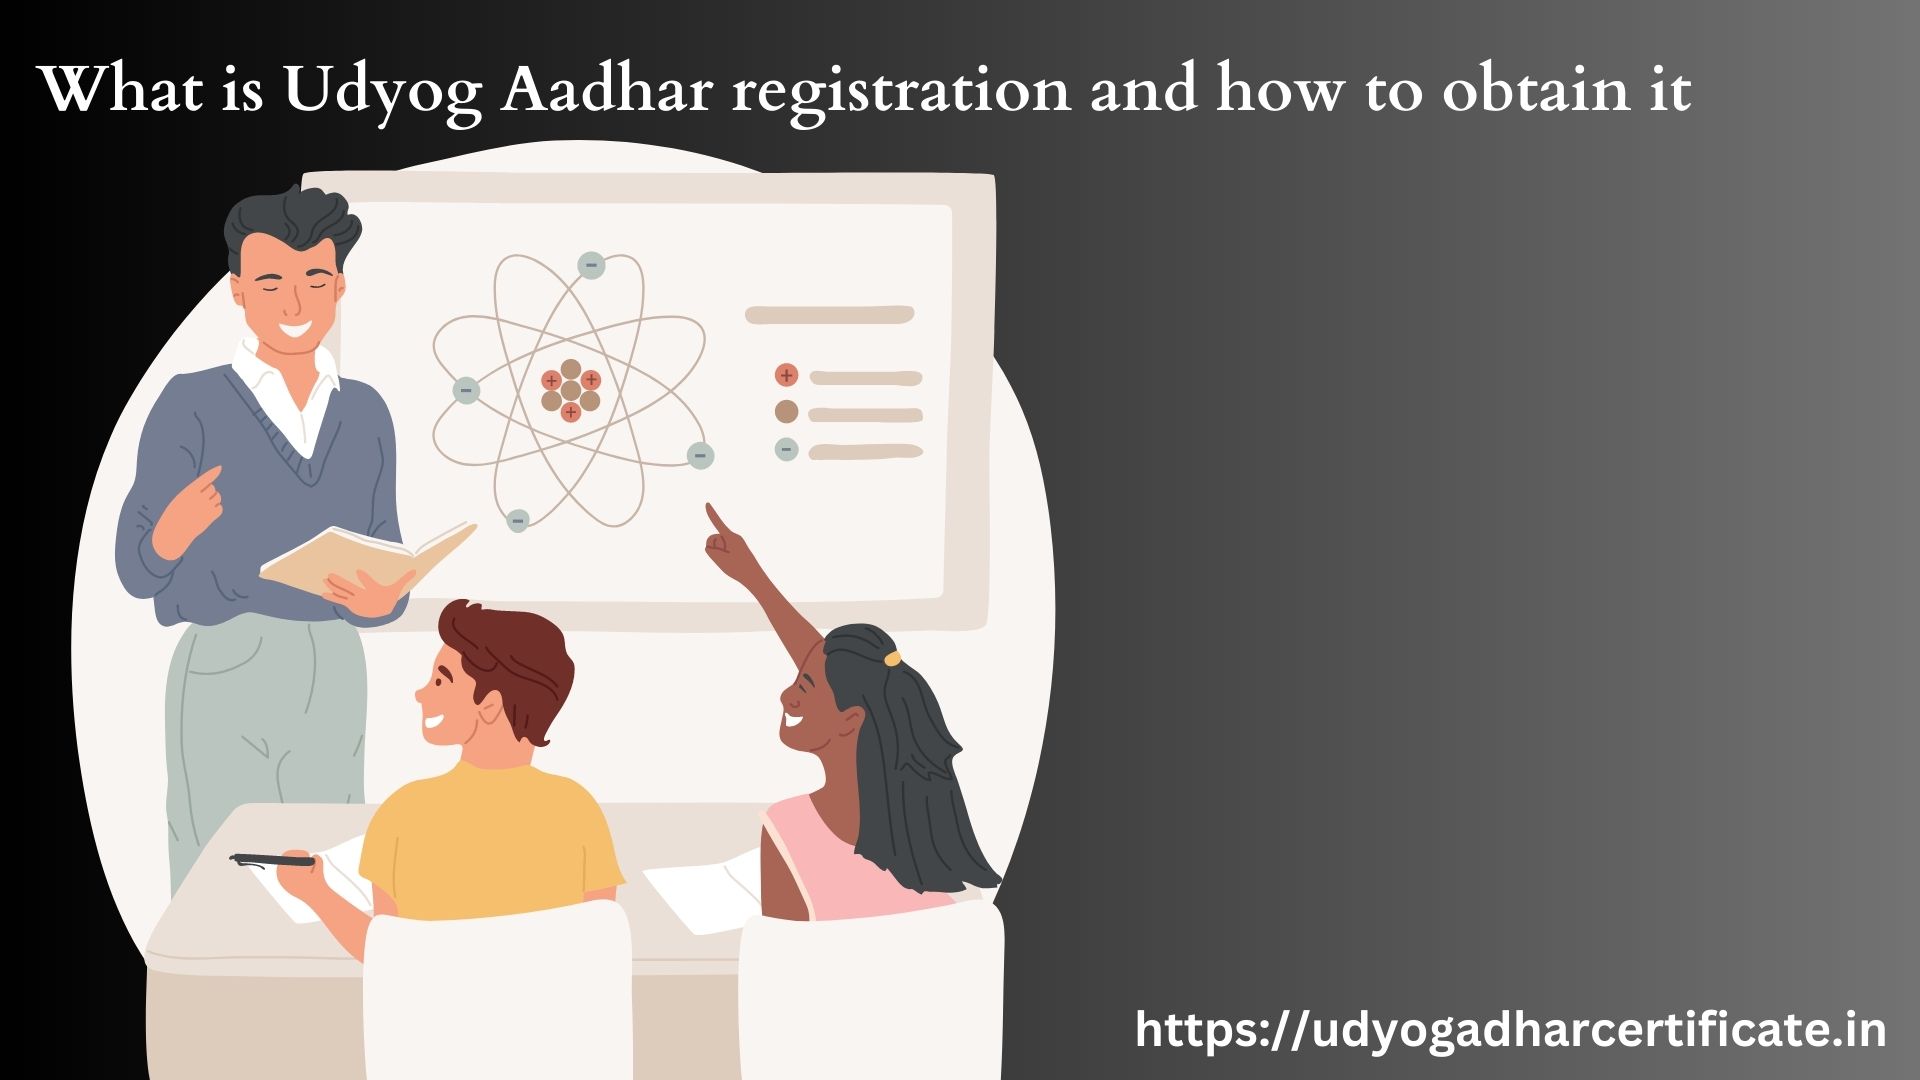 What is Udyog Aadhar registration and how to obtain it